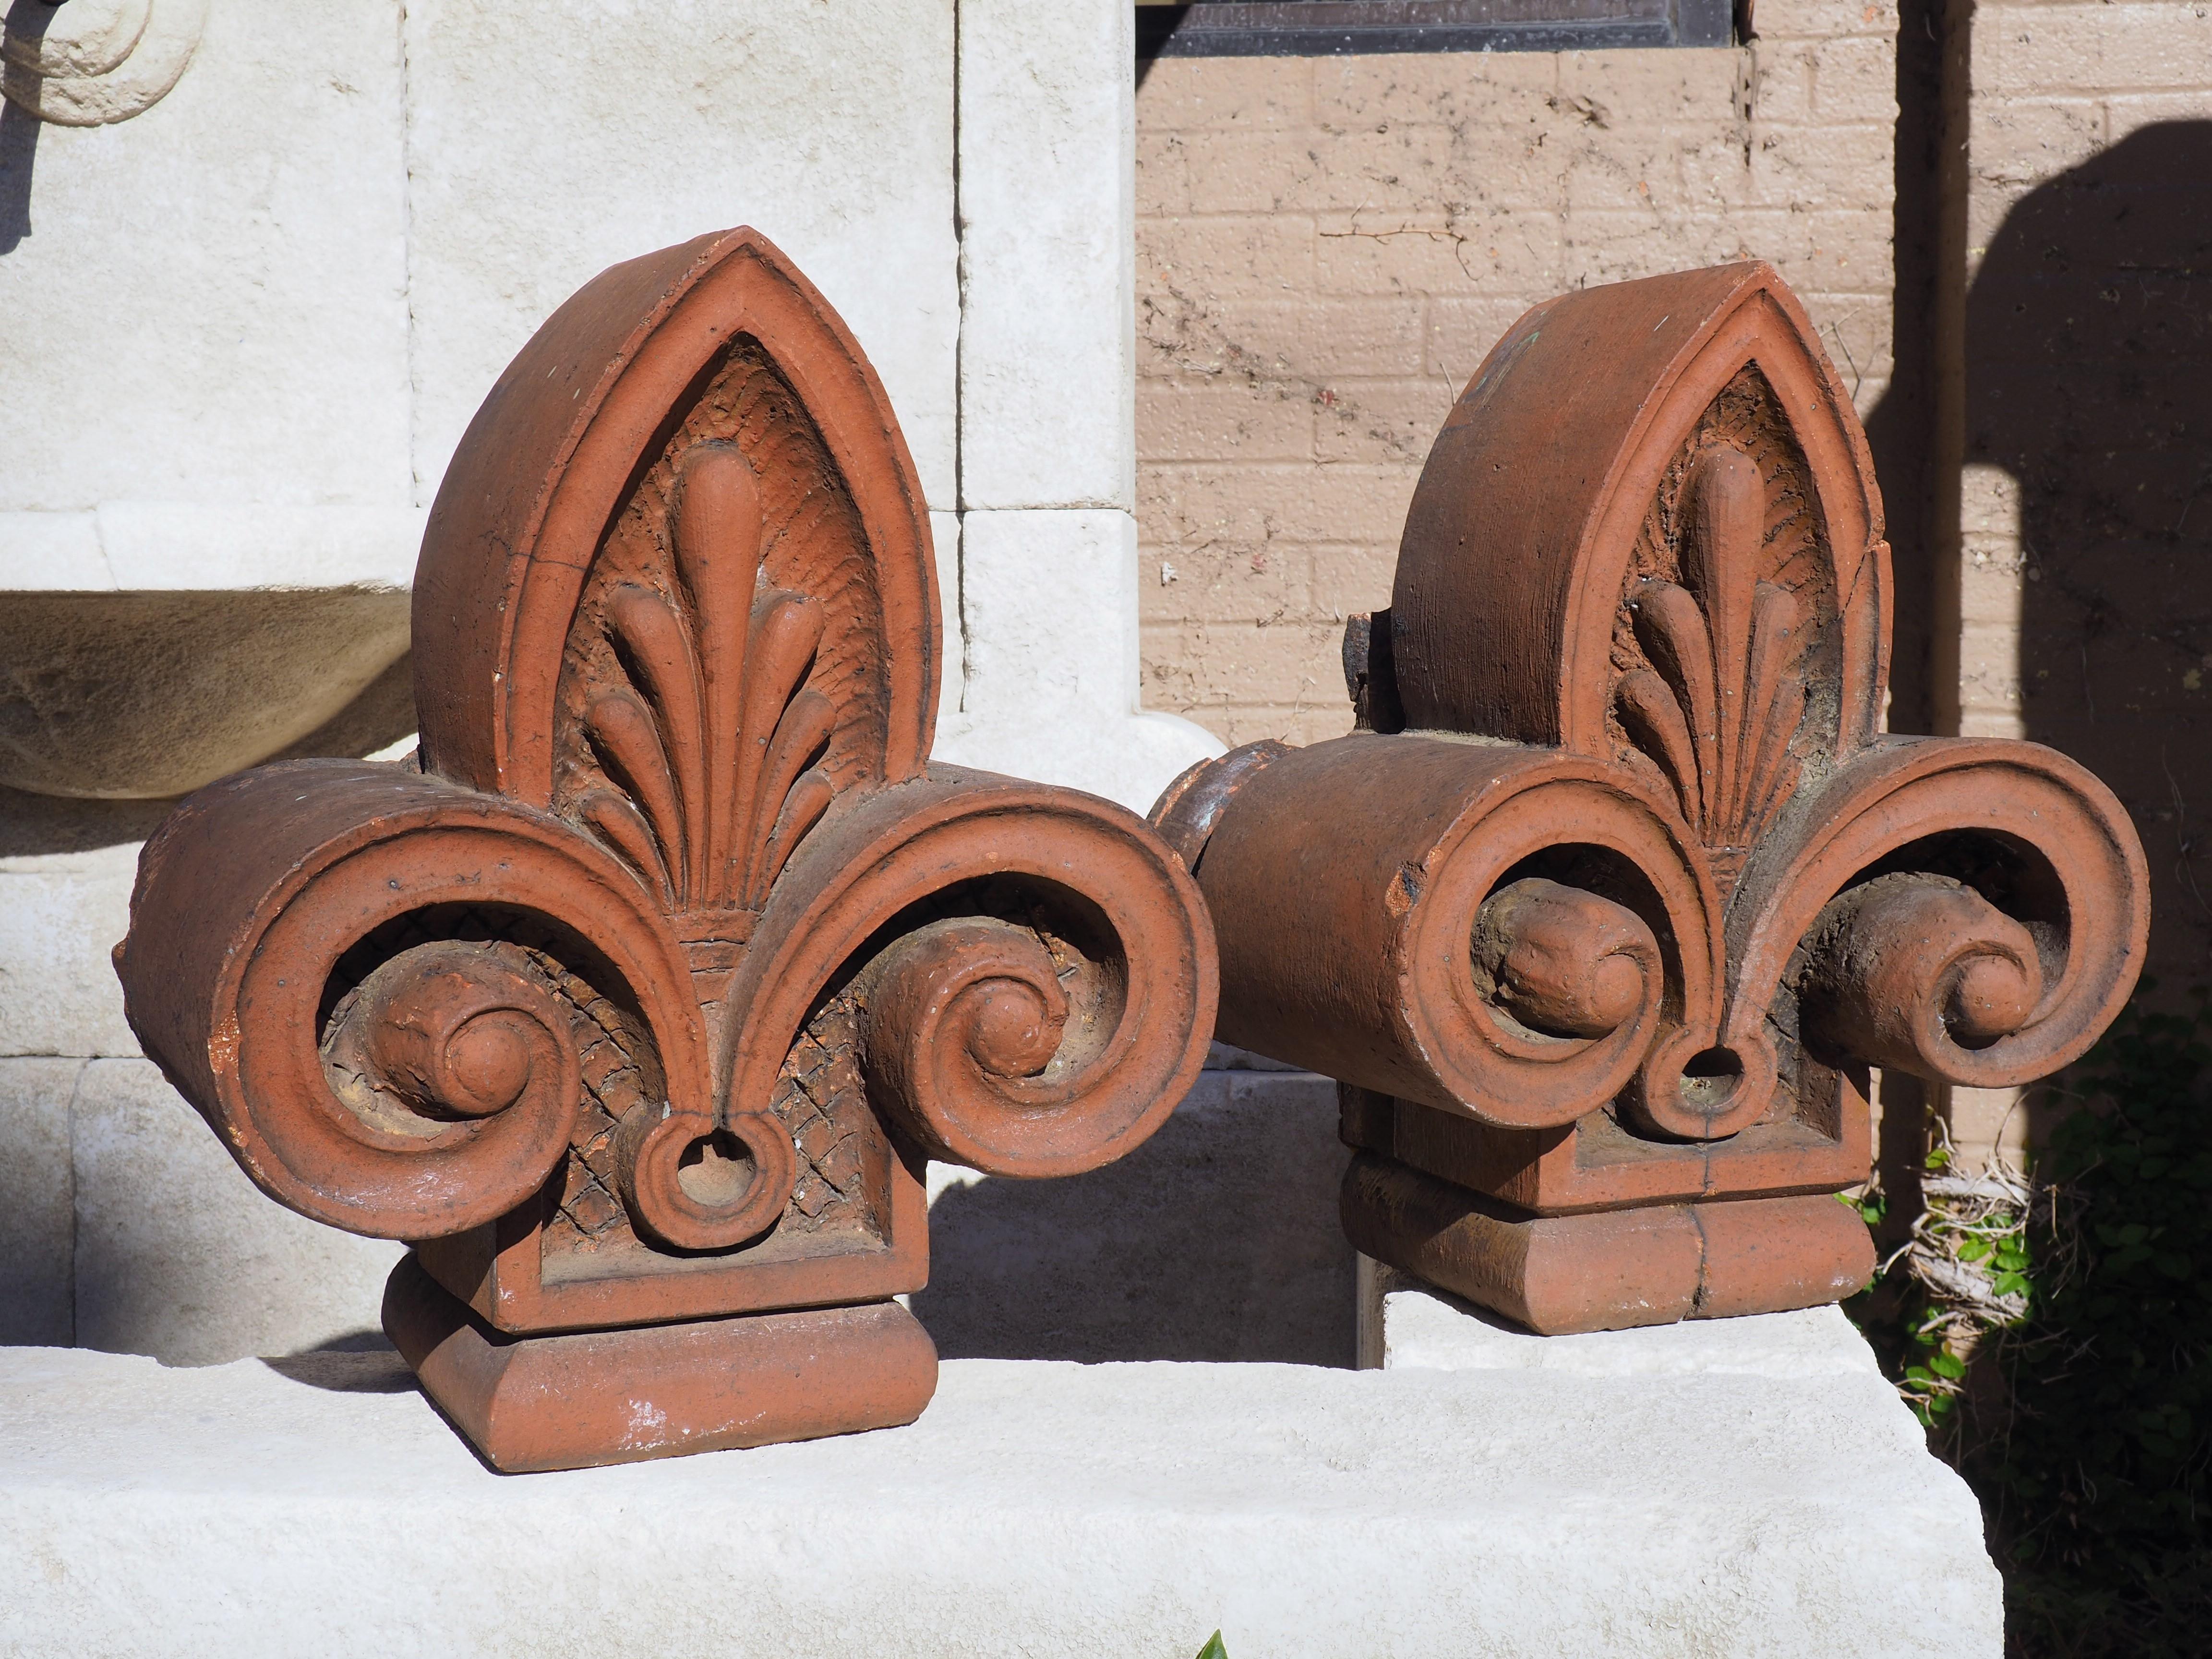 Originally attached to a French building, this pair of terra cotta fleur de lys finials is from circa 1880. The finials still retain their original terra cotta orange color but have developed a dark gray patina from years of exposure to the